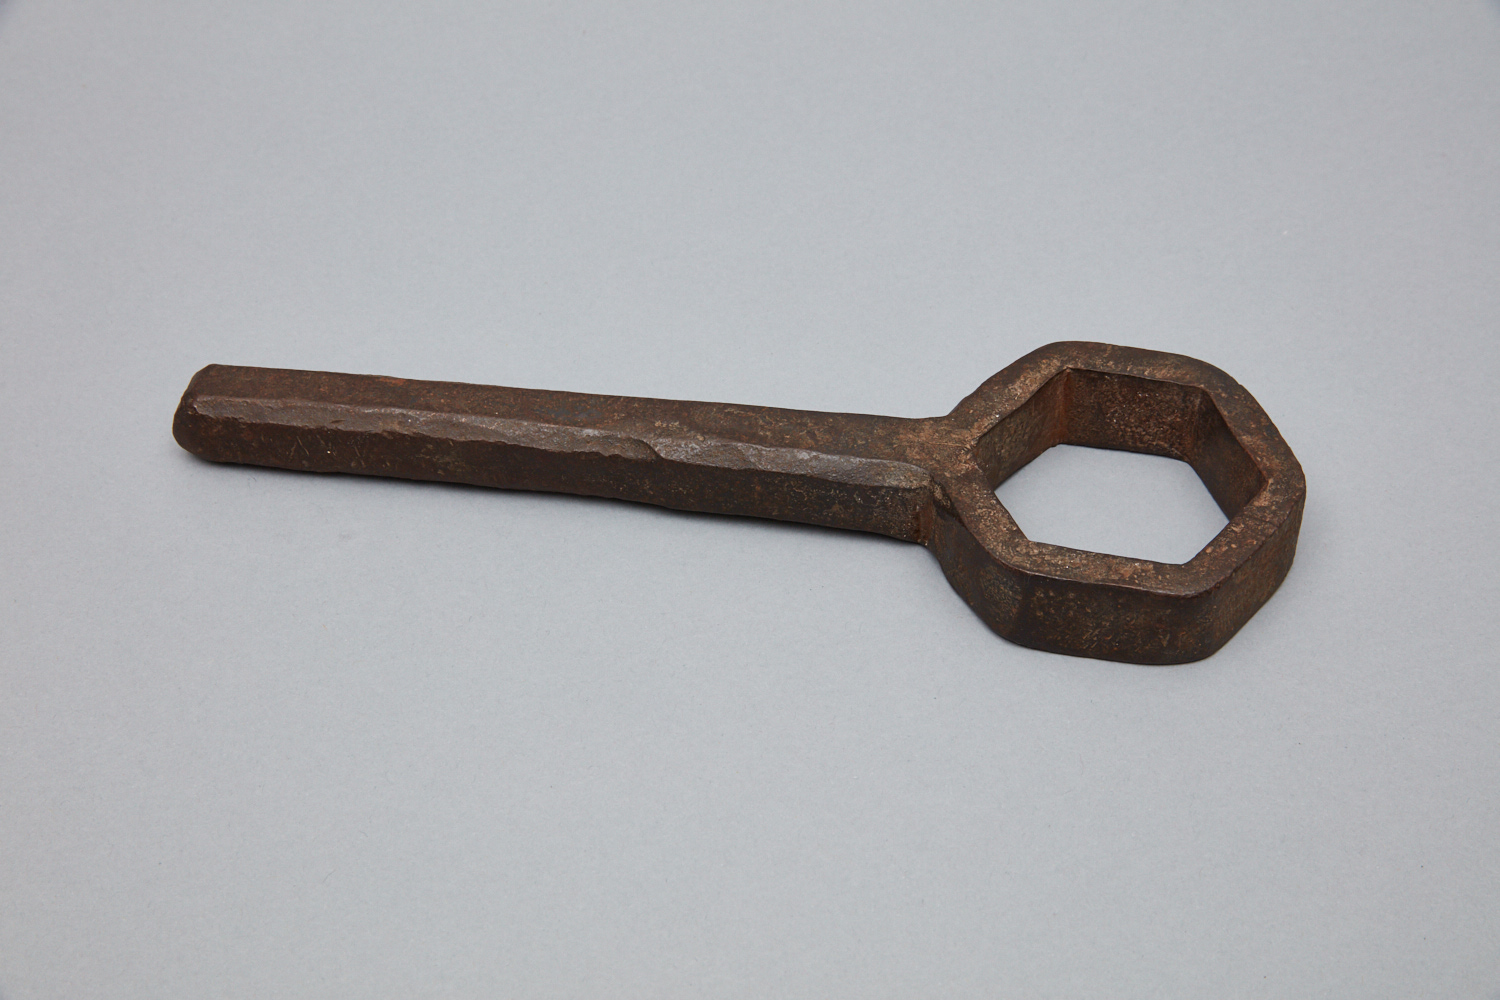 A wooden hex key on a gray surface.